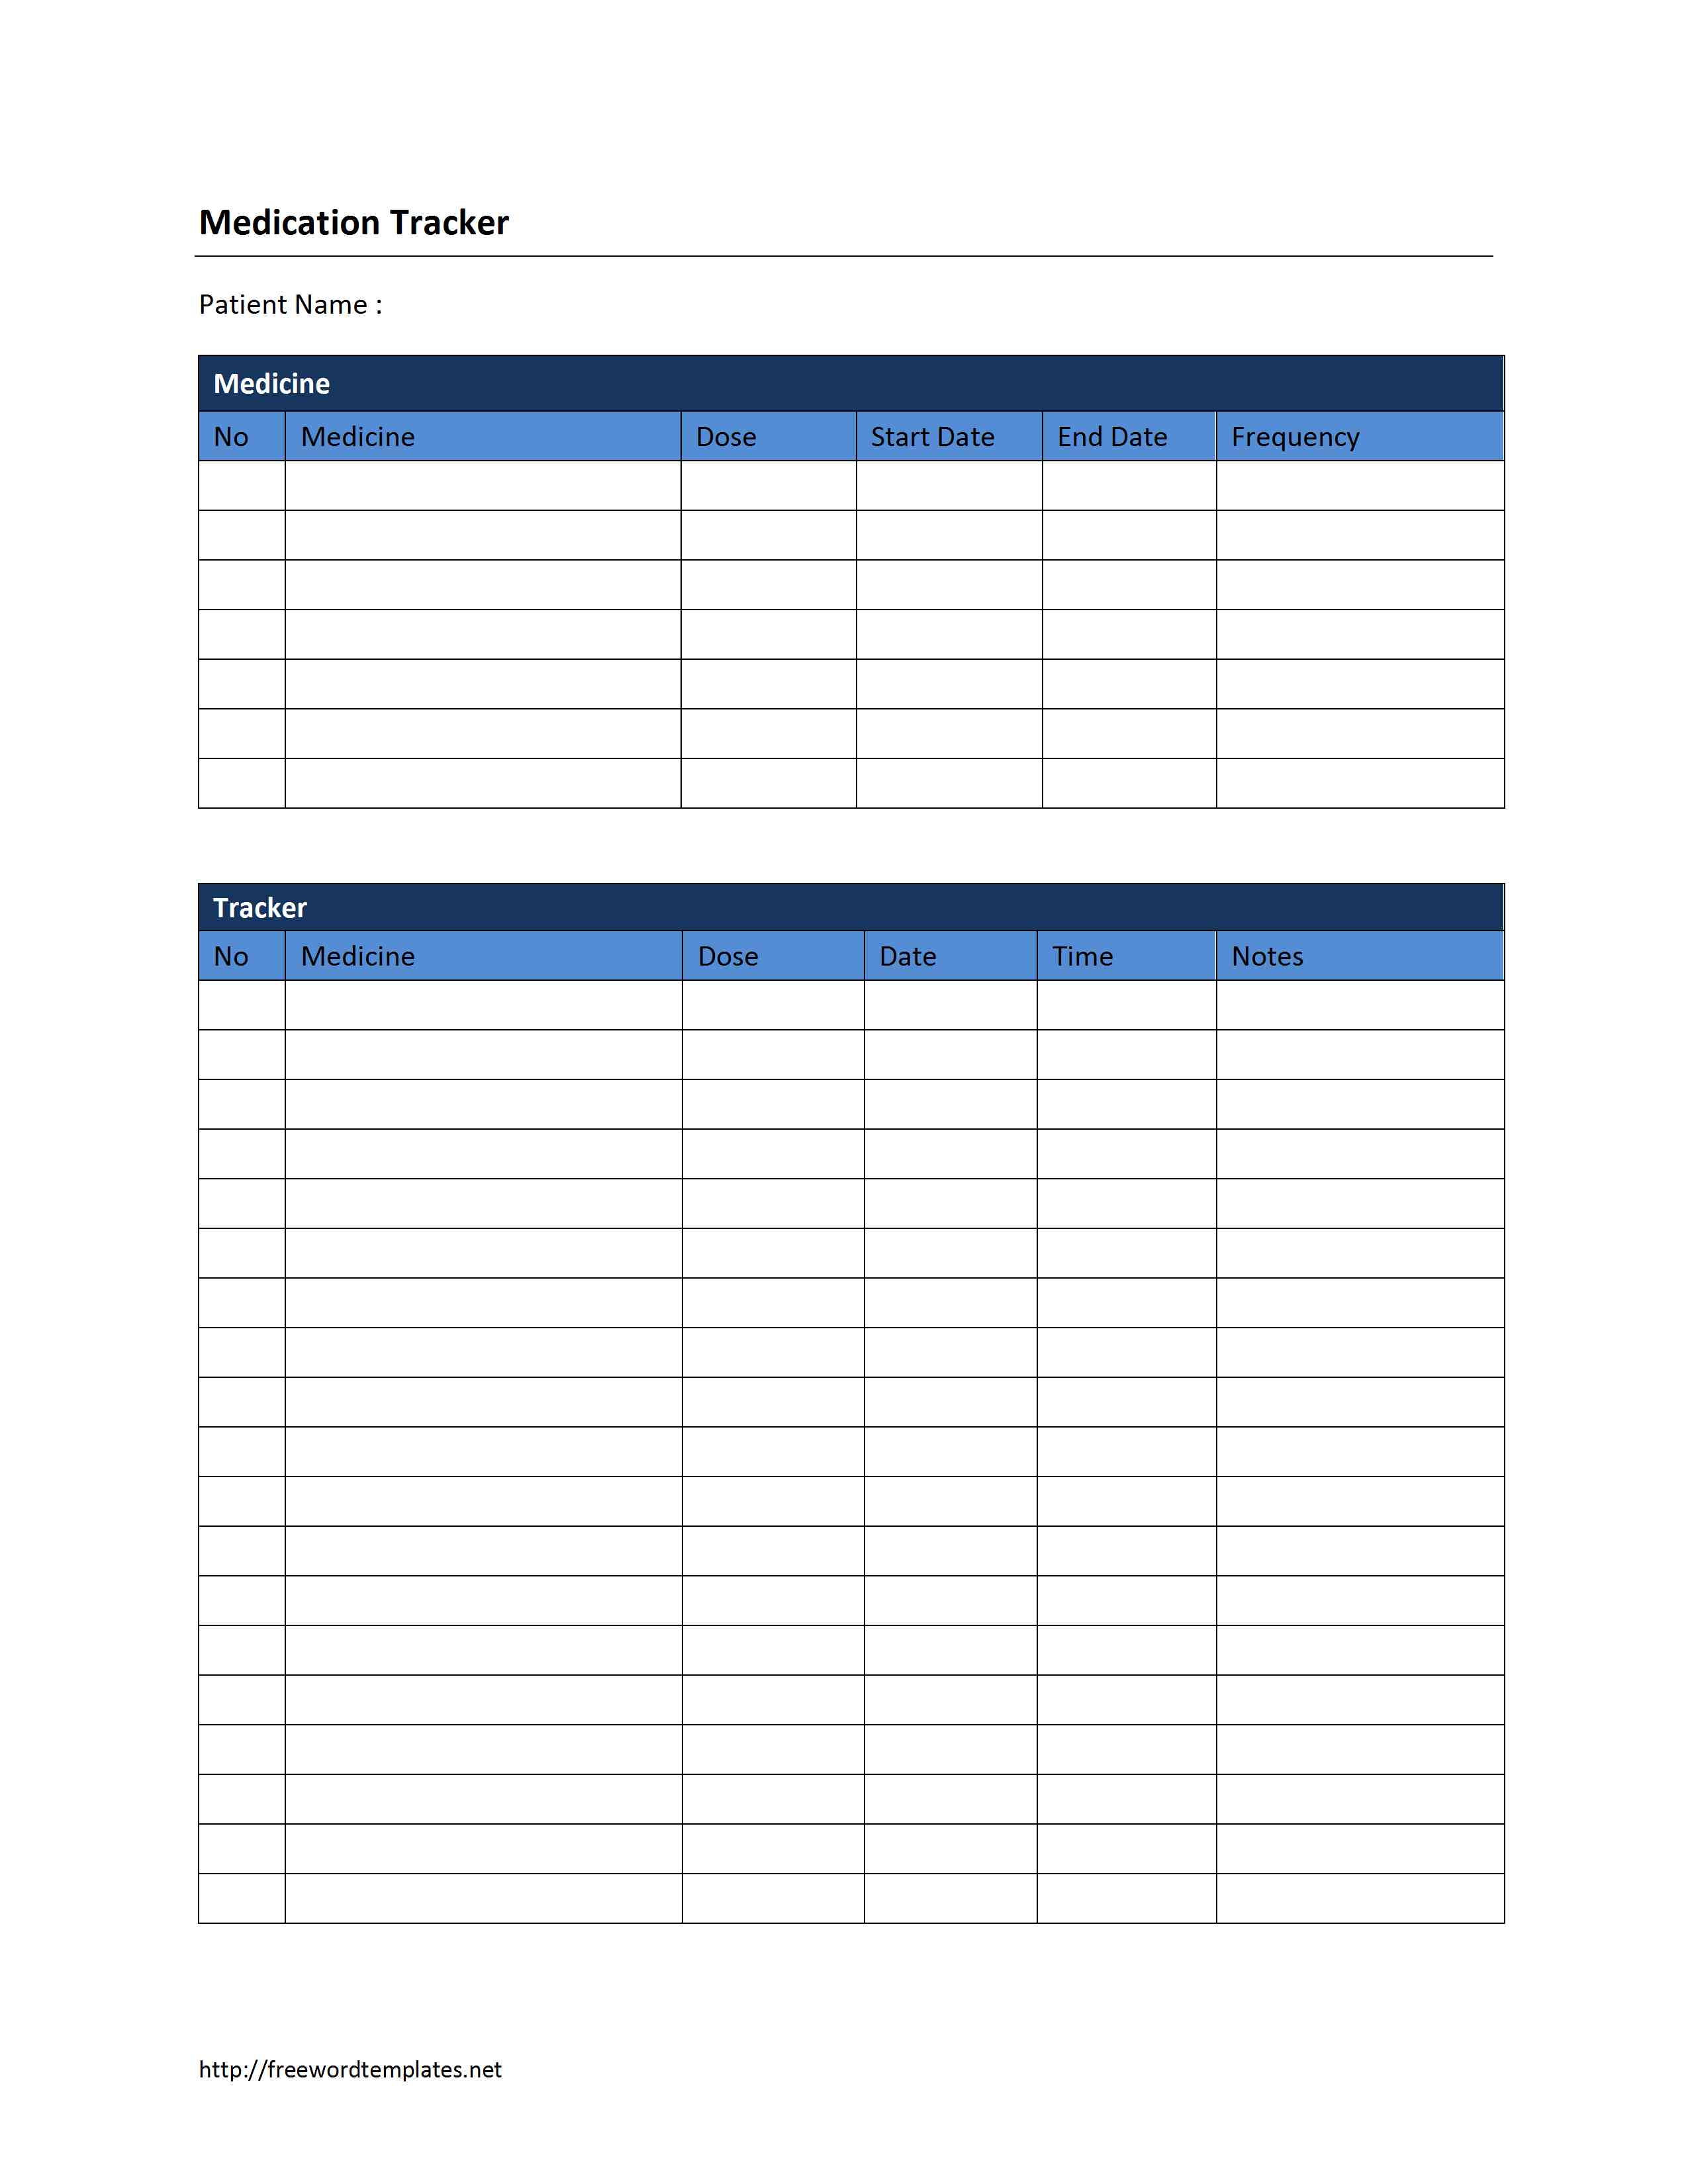 Medication Tracker Template for Word